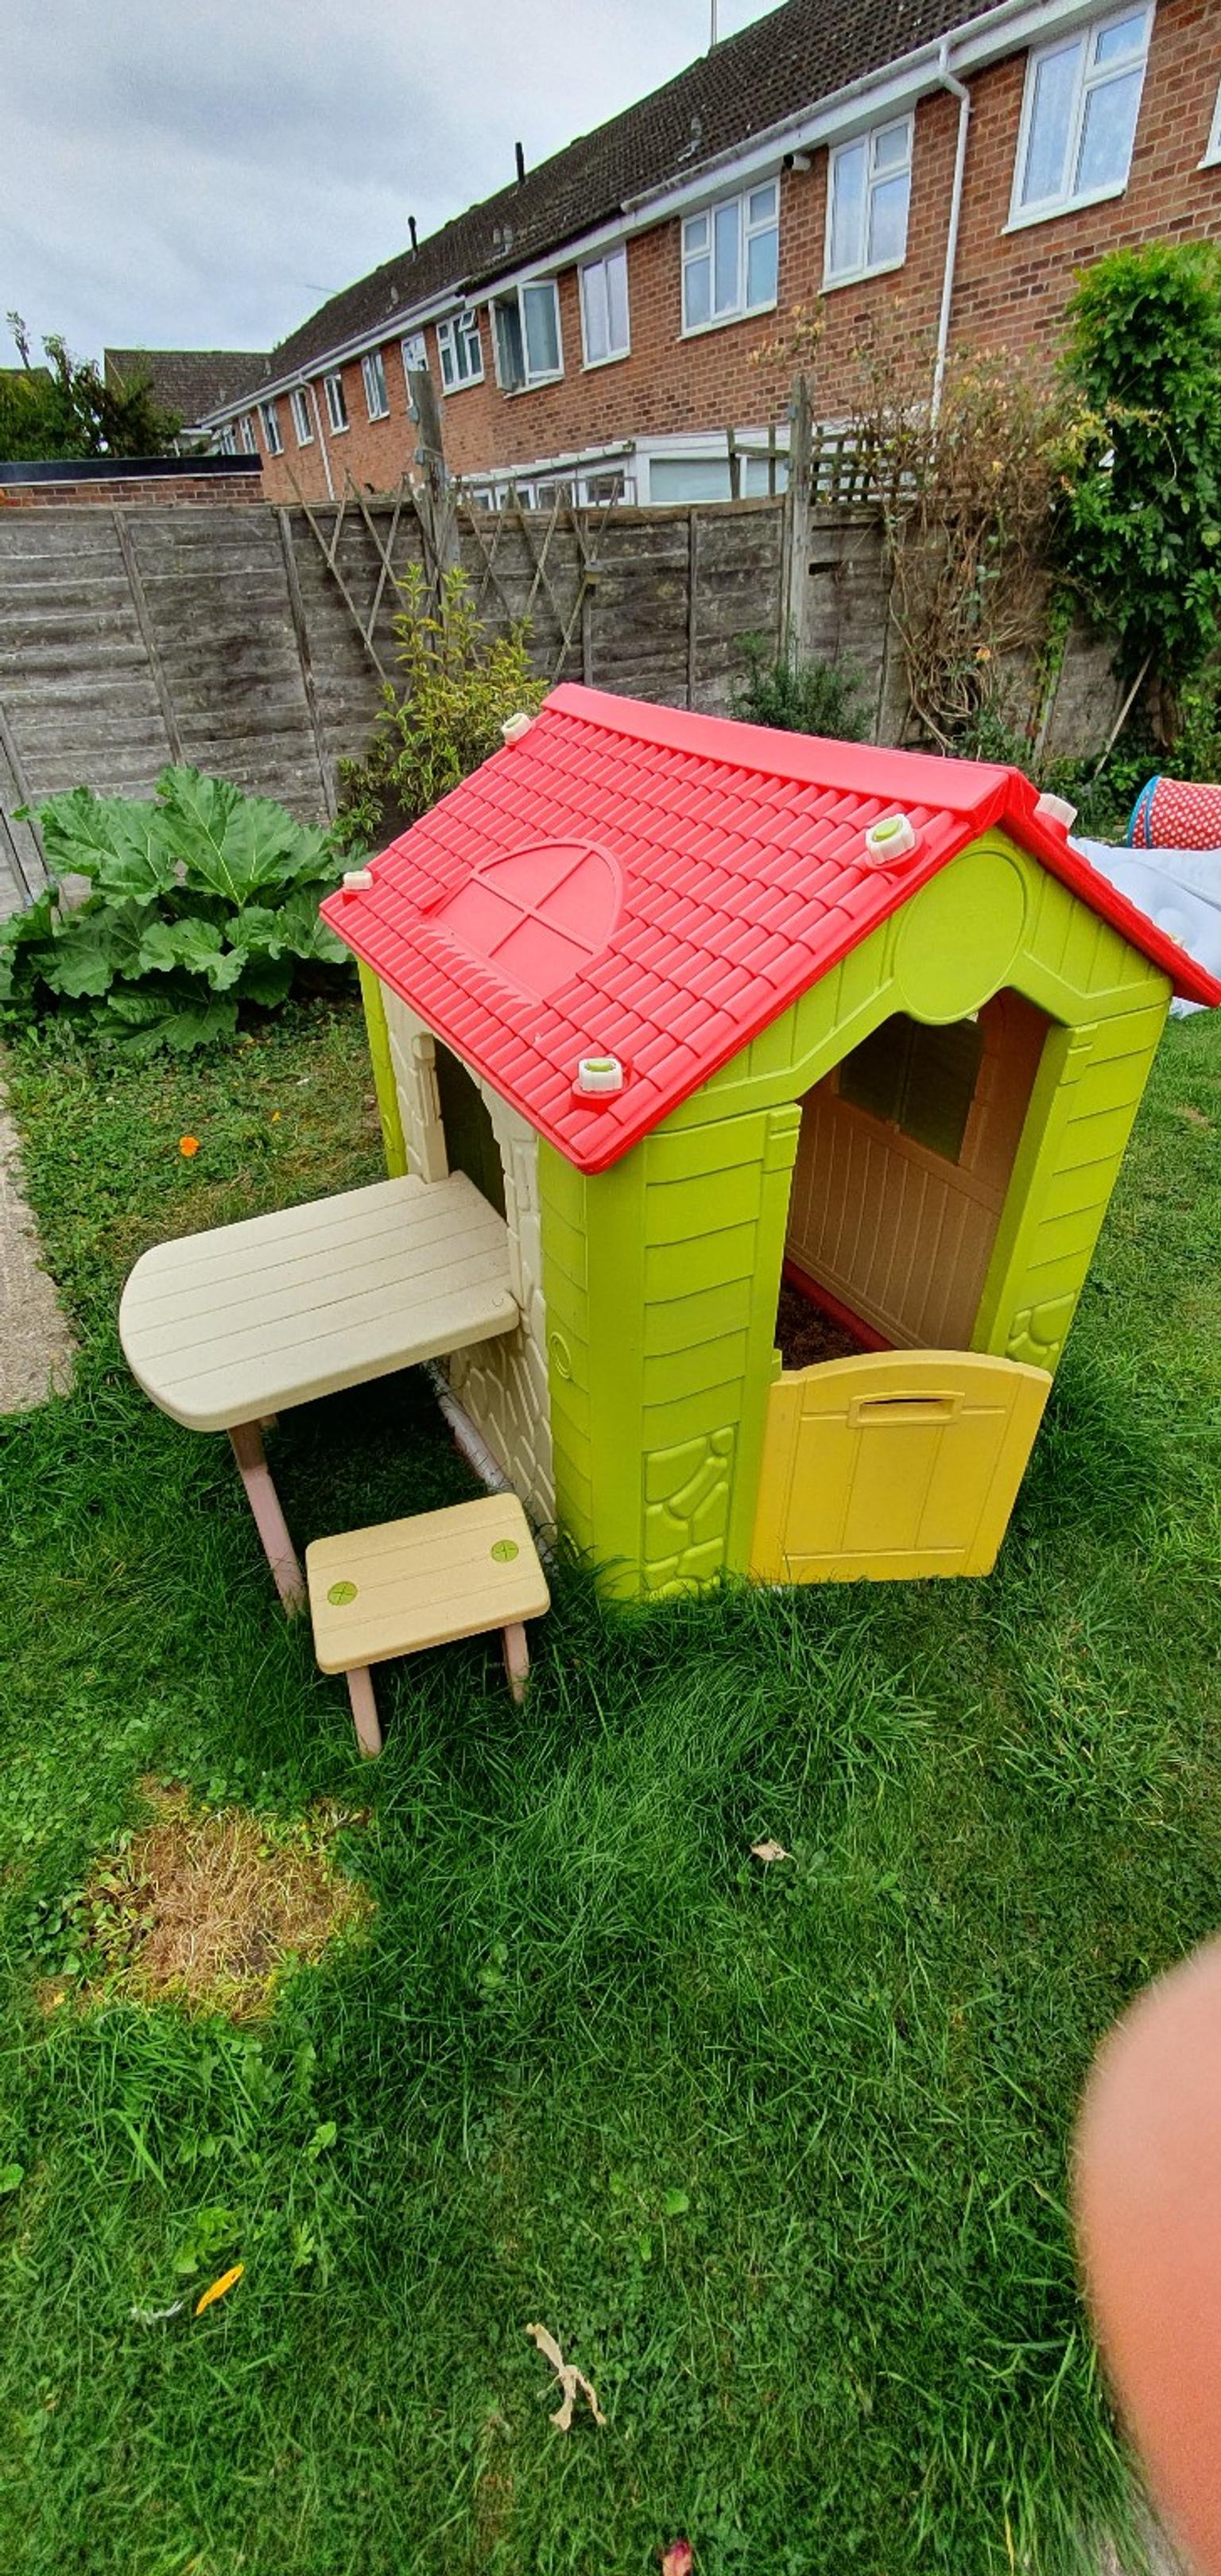 Little Tikes Playhouse In Chelmsford For 20 00 For Sale Shpock